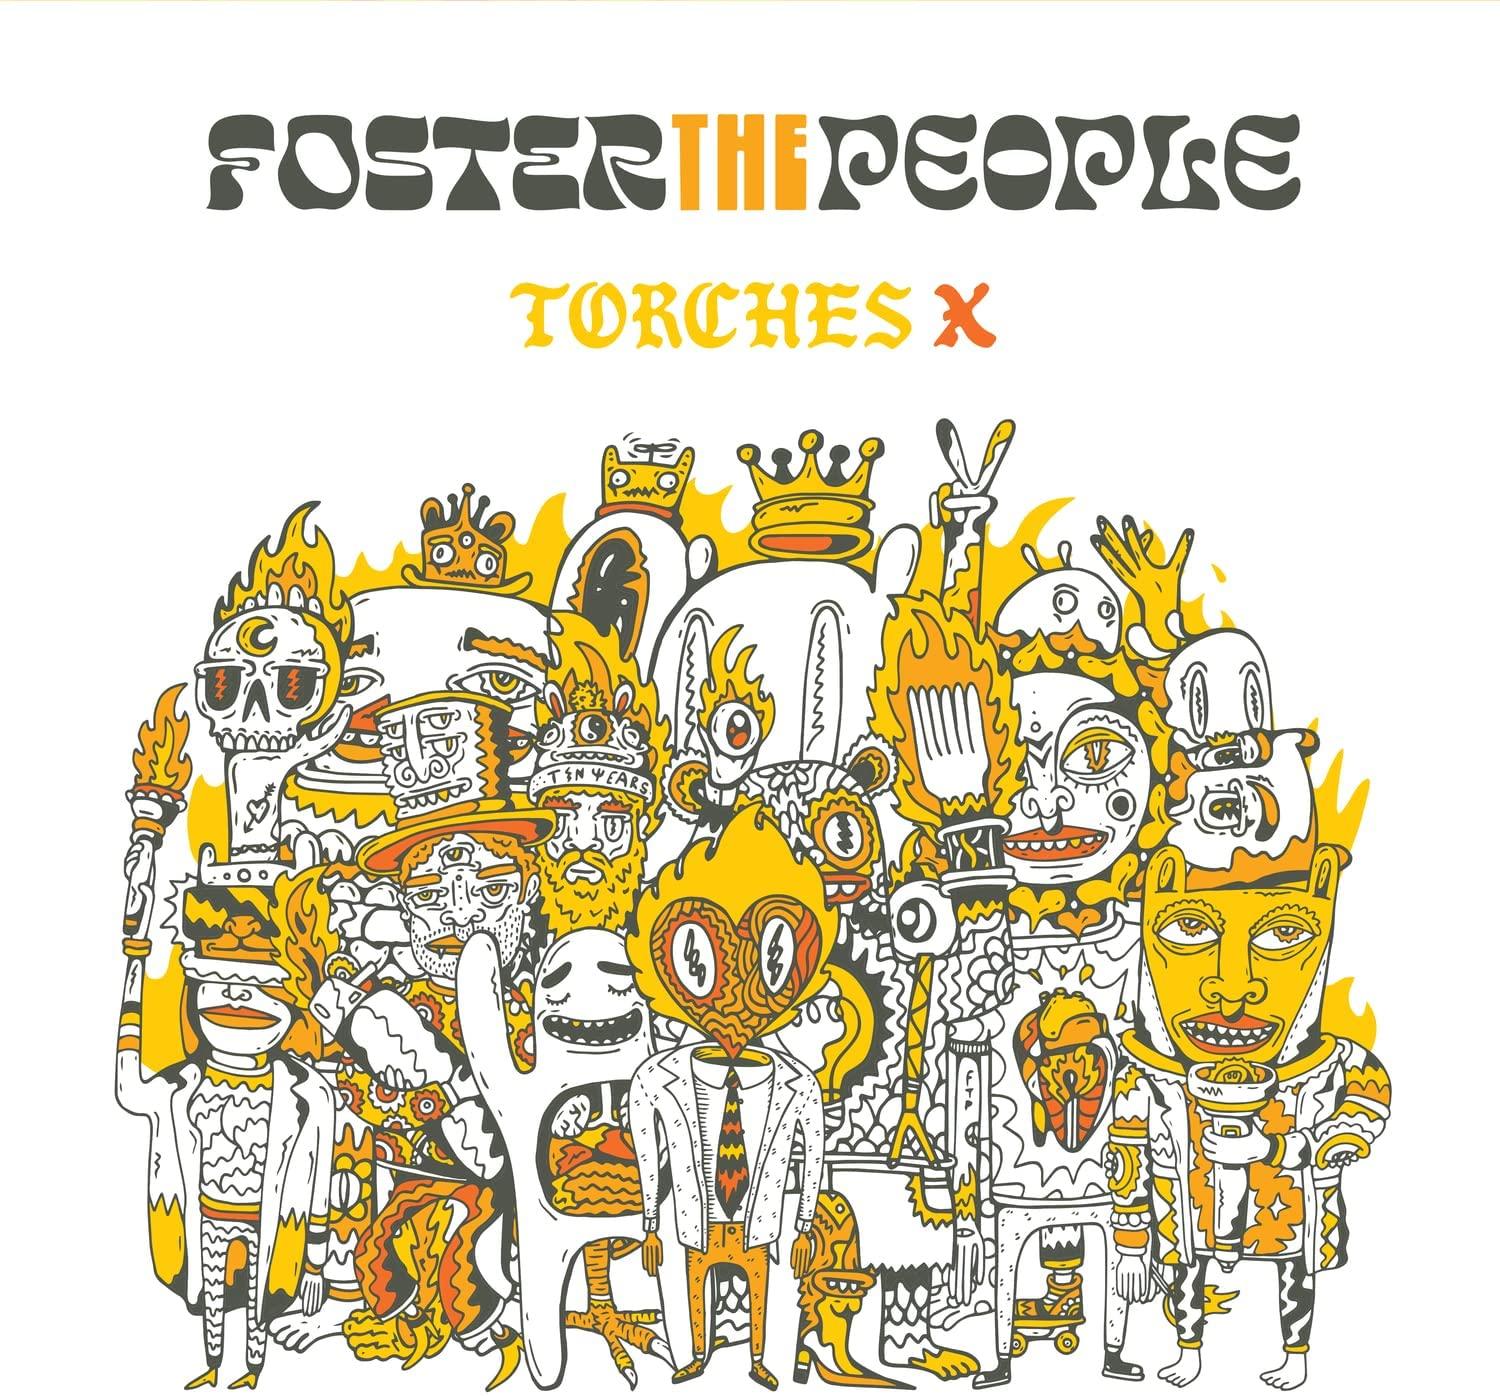 Foster the People - Torches X (2011) (Coloured Vinyl) 2LP